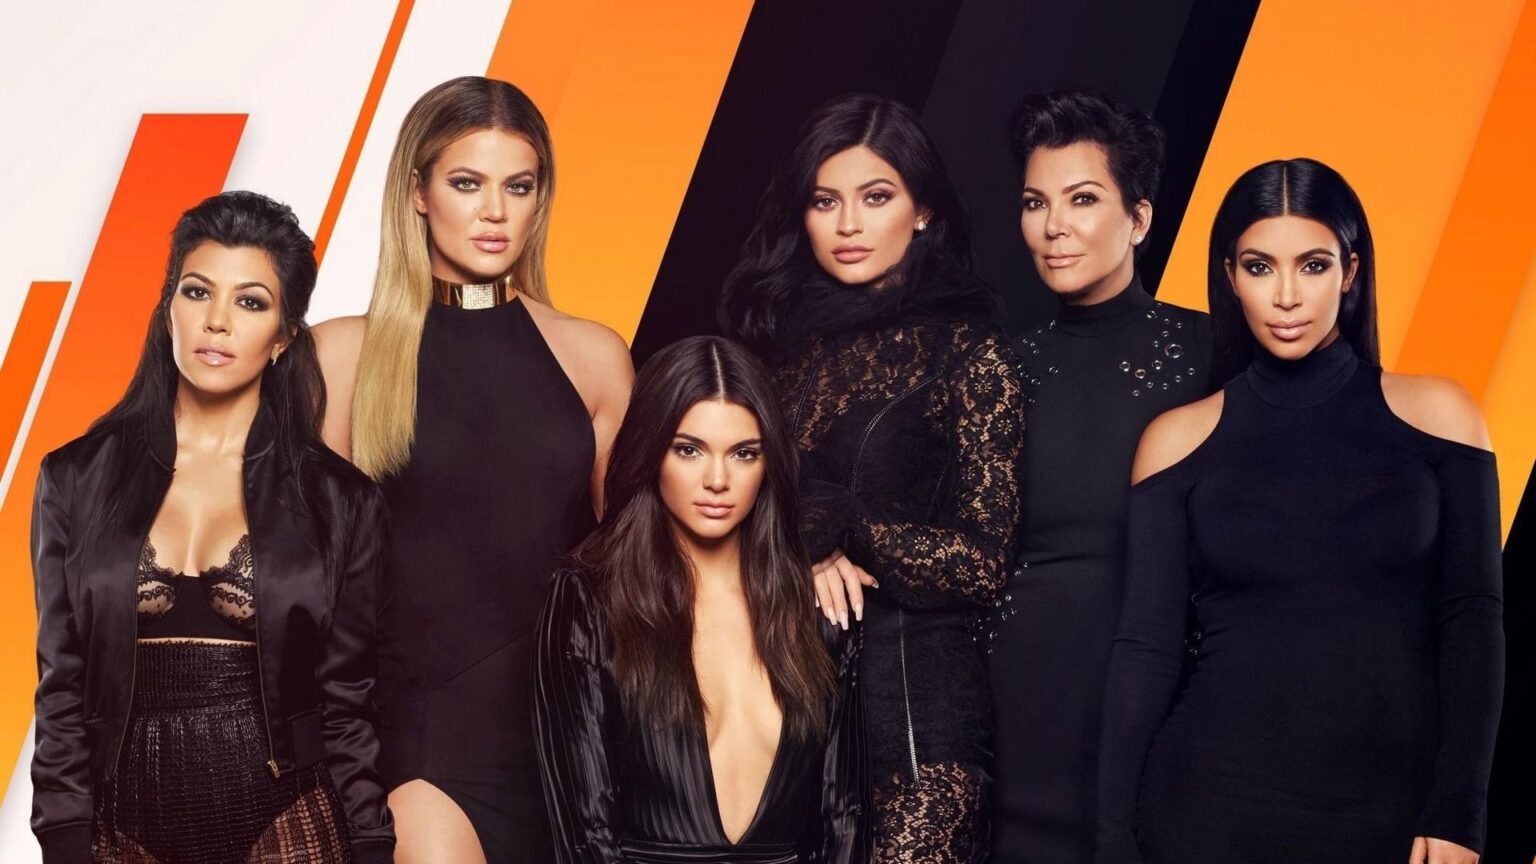 The Kardashian sisters have never been accused of being a thoughtful bunch. Here are the latest tone deaf social media posts from the family.